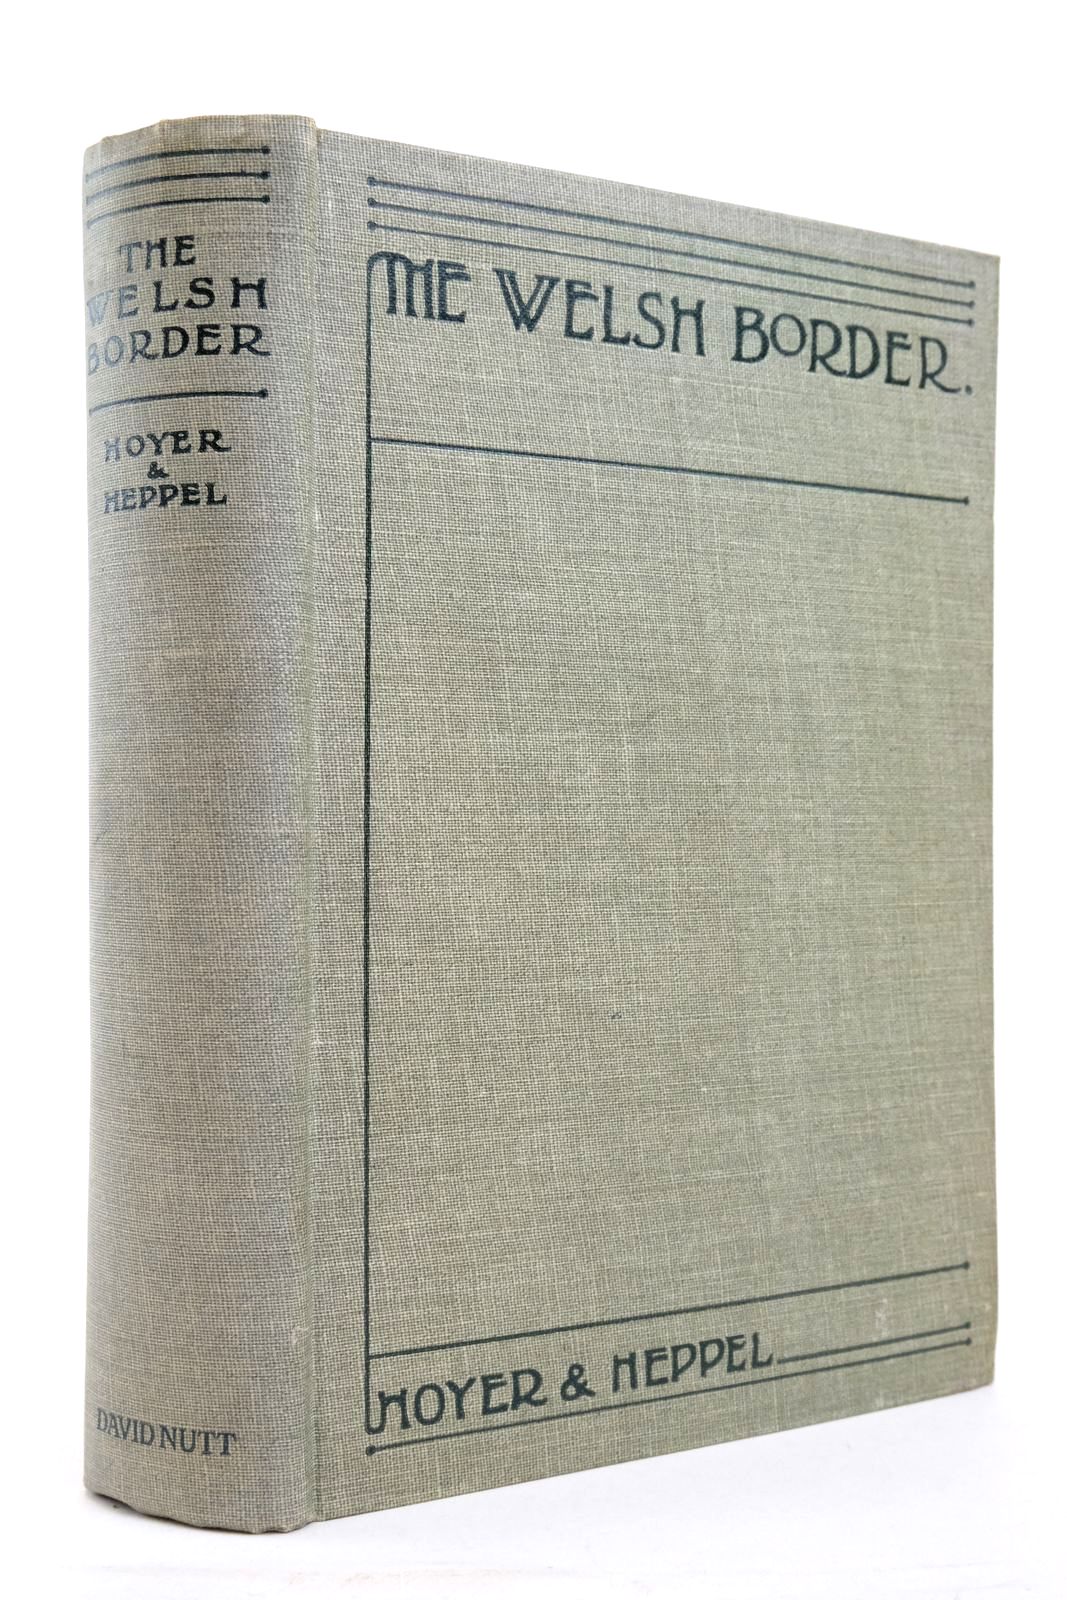 Photo of THE WELSH BORDER- Stock Number: 2136766